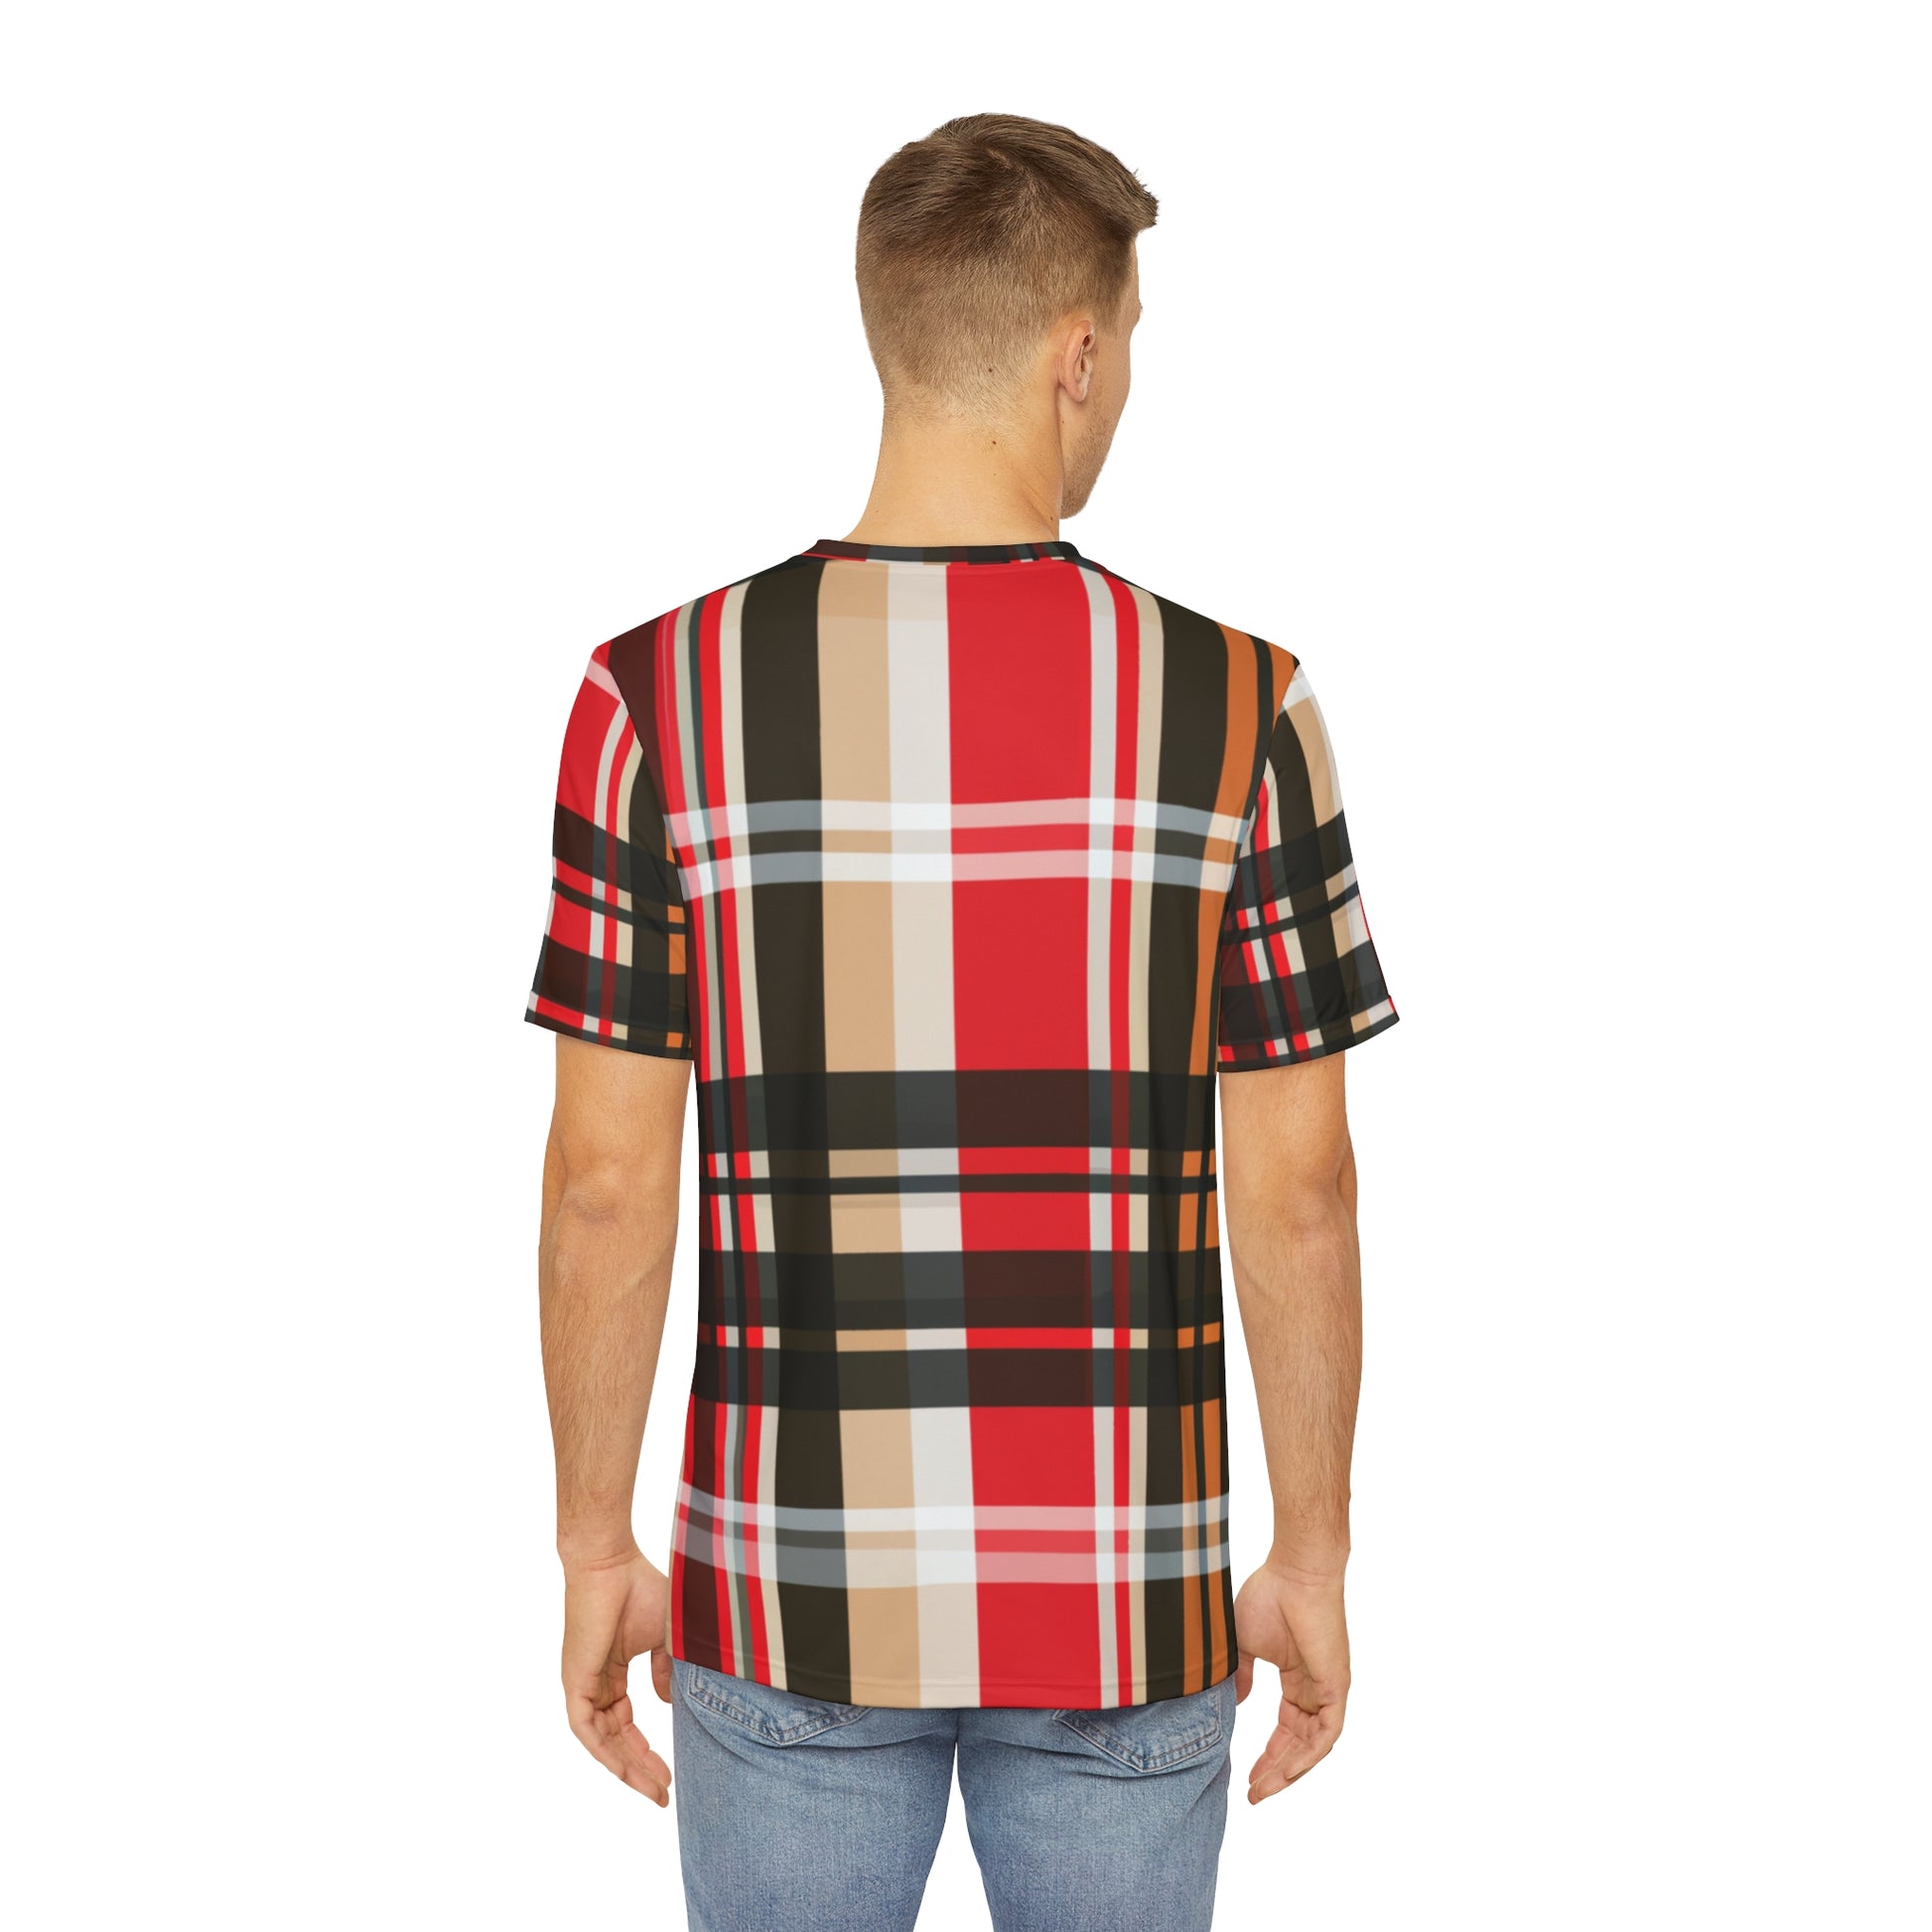 Back view of the Glasgow Plaid Crewneck Pullover All-Over Print Short-Sleeved Shirt red black white yellow mustard plaid pattern paired with casual denim jeans worn by a white male